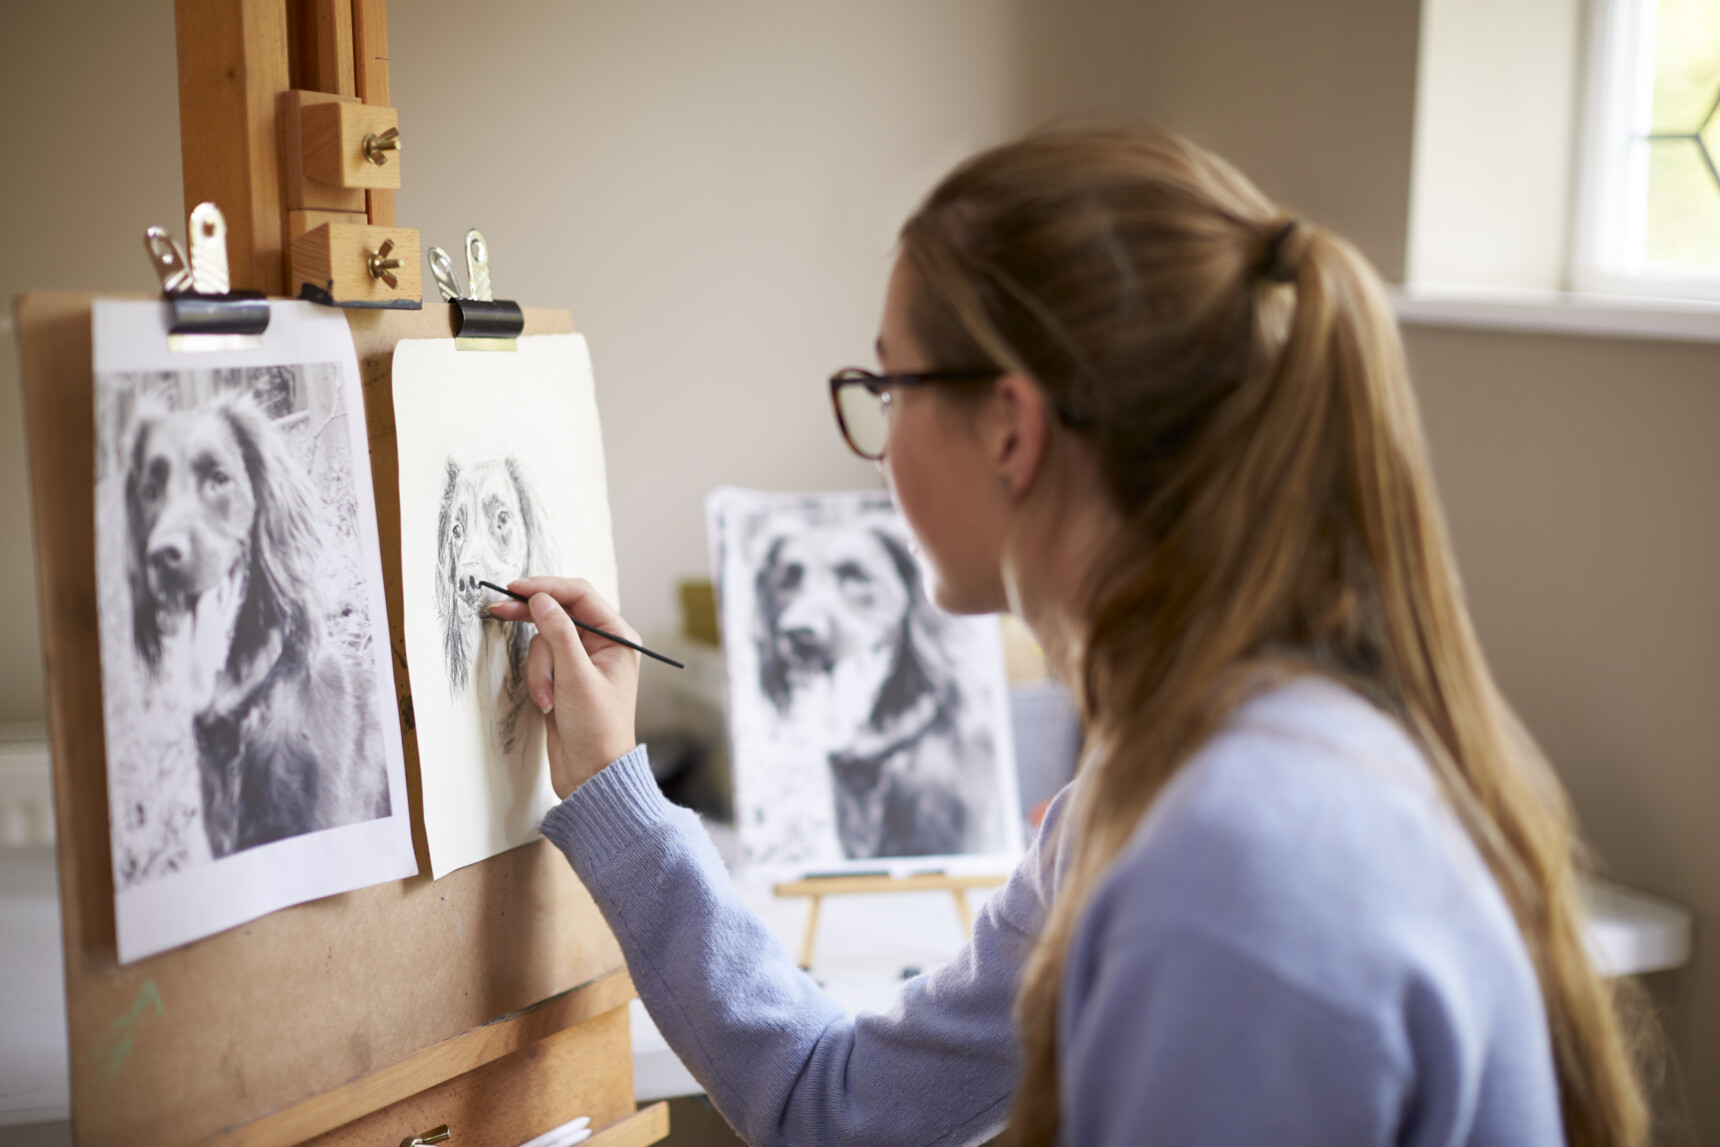 Why do an EPQ? If you're into art, you could create an artefact for your EPQ, like this teenage girl sitting at an easel and sketching a dog.